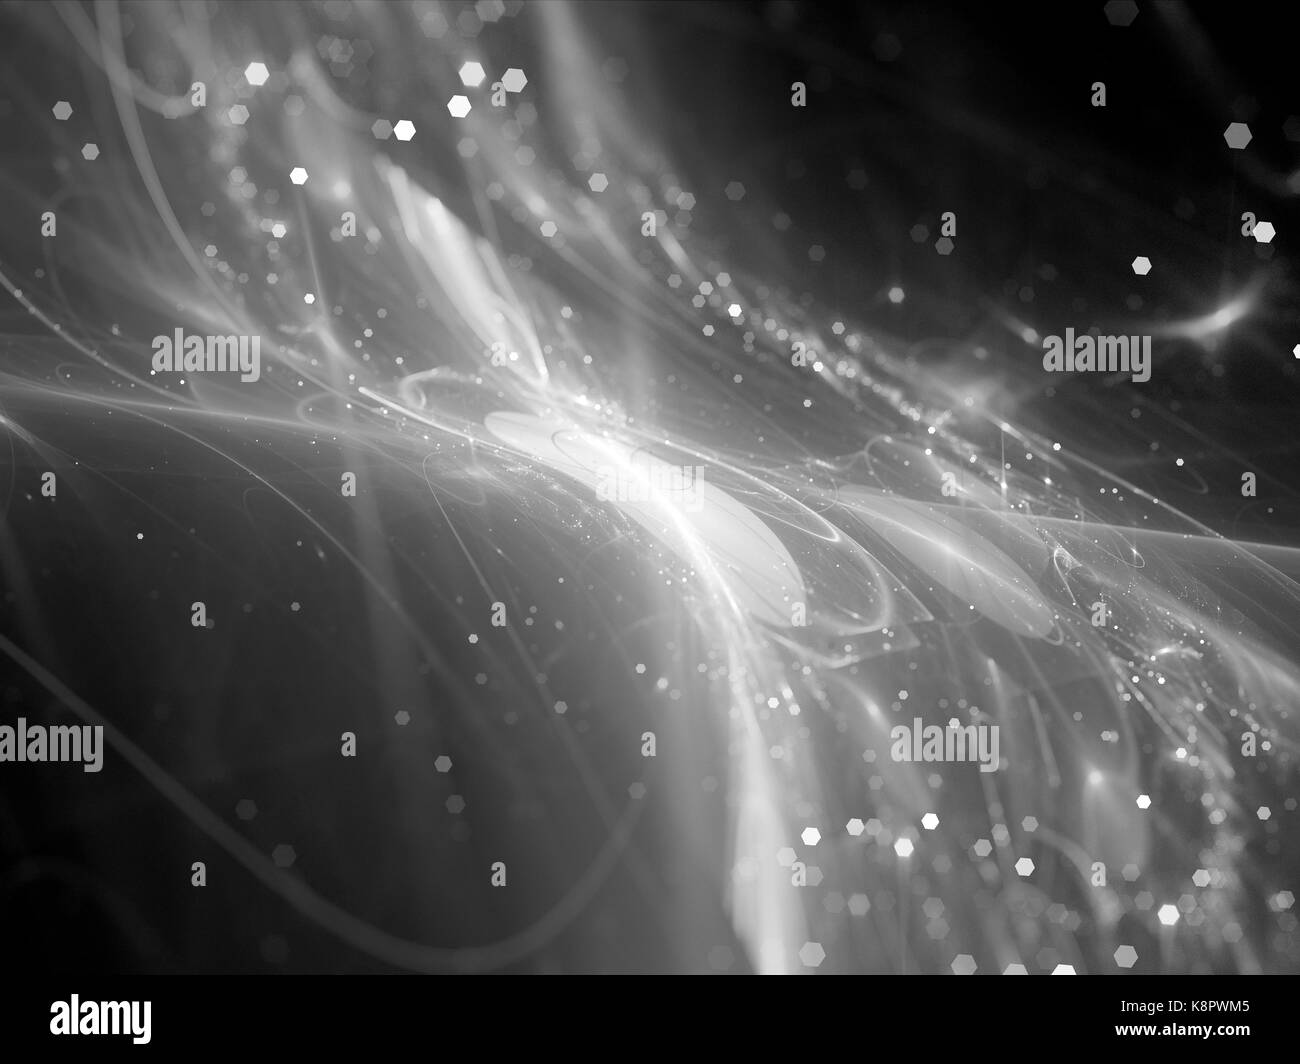 Glowing new technology flow in space texture, computer generated abstract background, 3D rendering Stock Photo